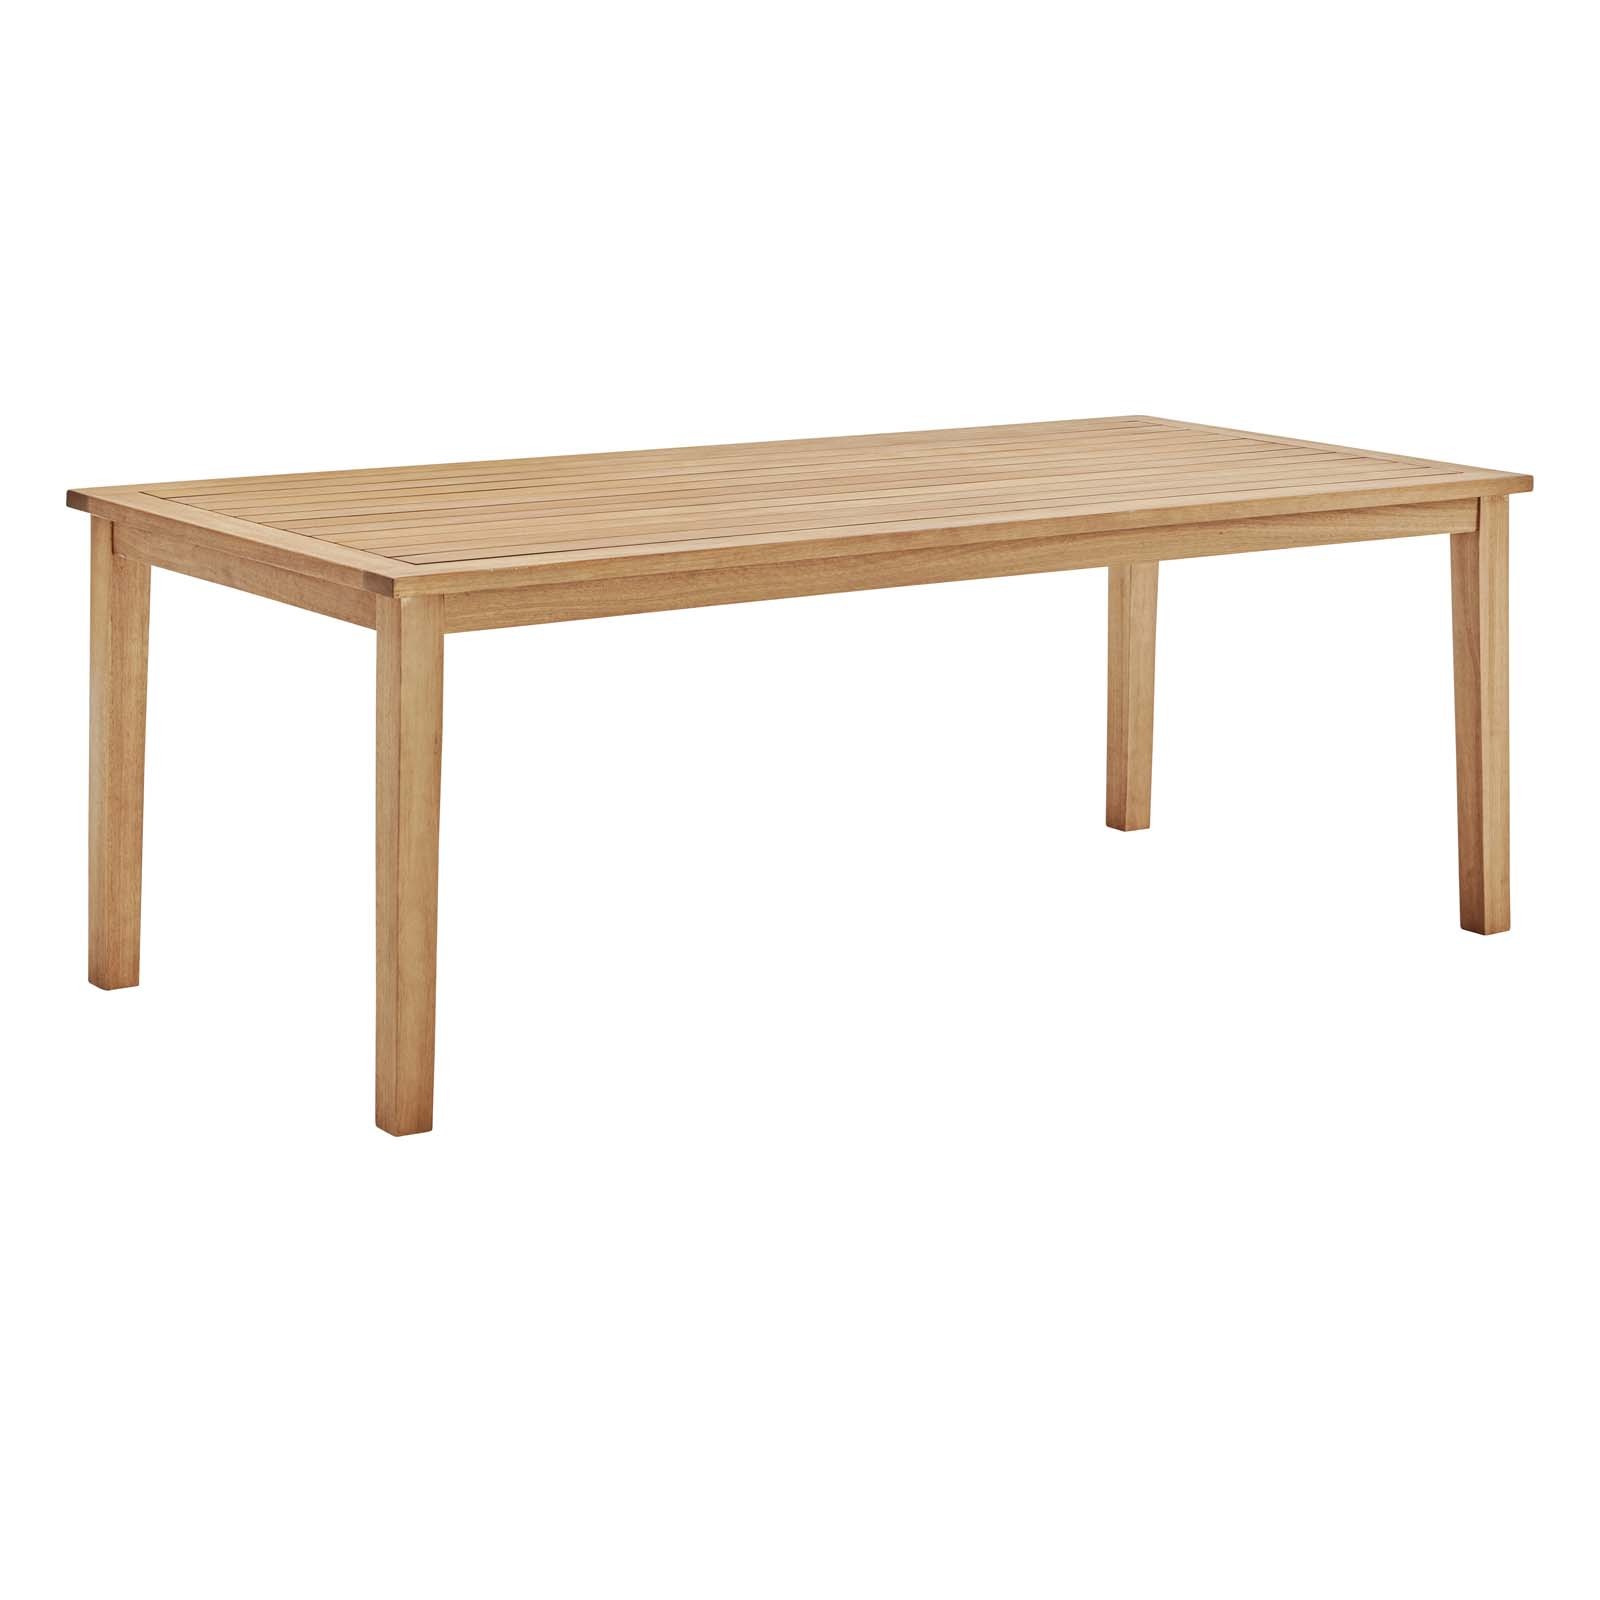 Viewscape 83 Inch Outdoor Patio Ash Wood Dining Table in Natural